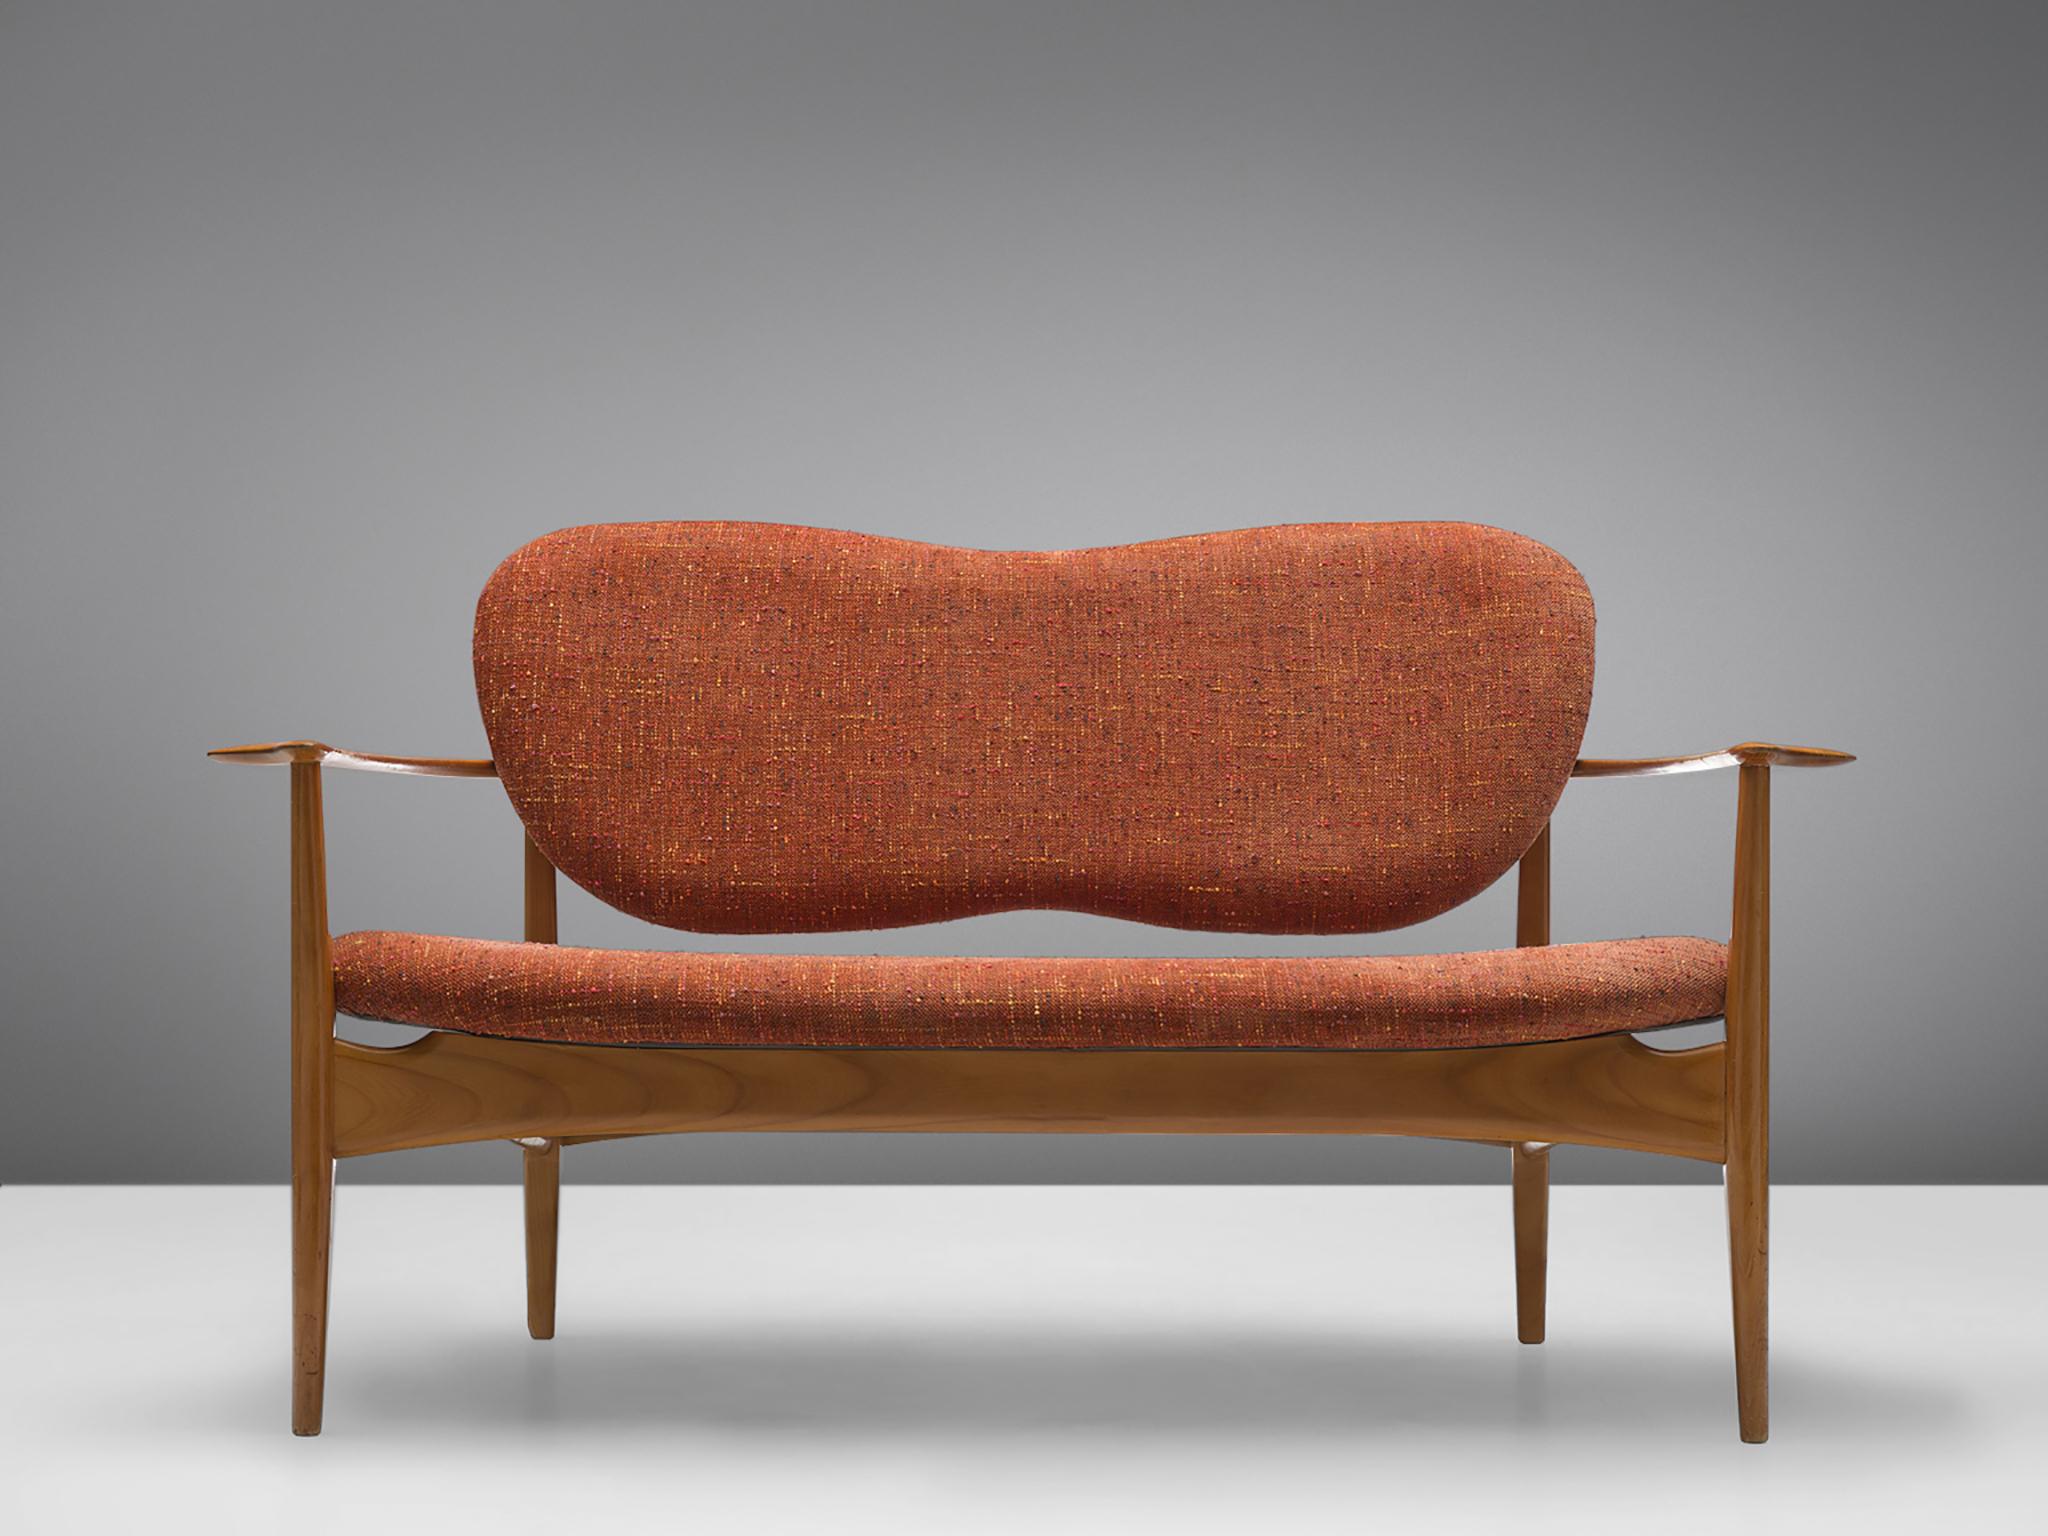 Sofa, fabric, cherry, Denmark, 1950s.

This elegant, curved settee features a waved, butterfly back and four tapered wooden legs. The sofa is executed with high, sculpted armrests. The fabric seems to have a monochrome orange colour, but in fact